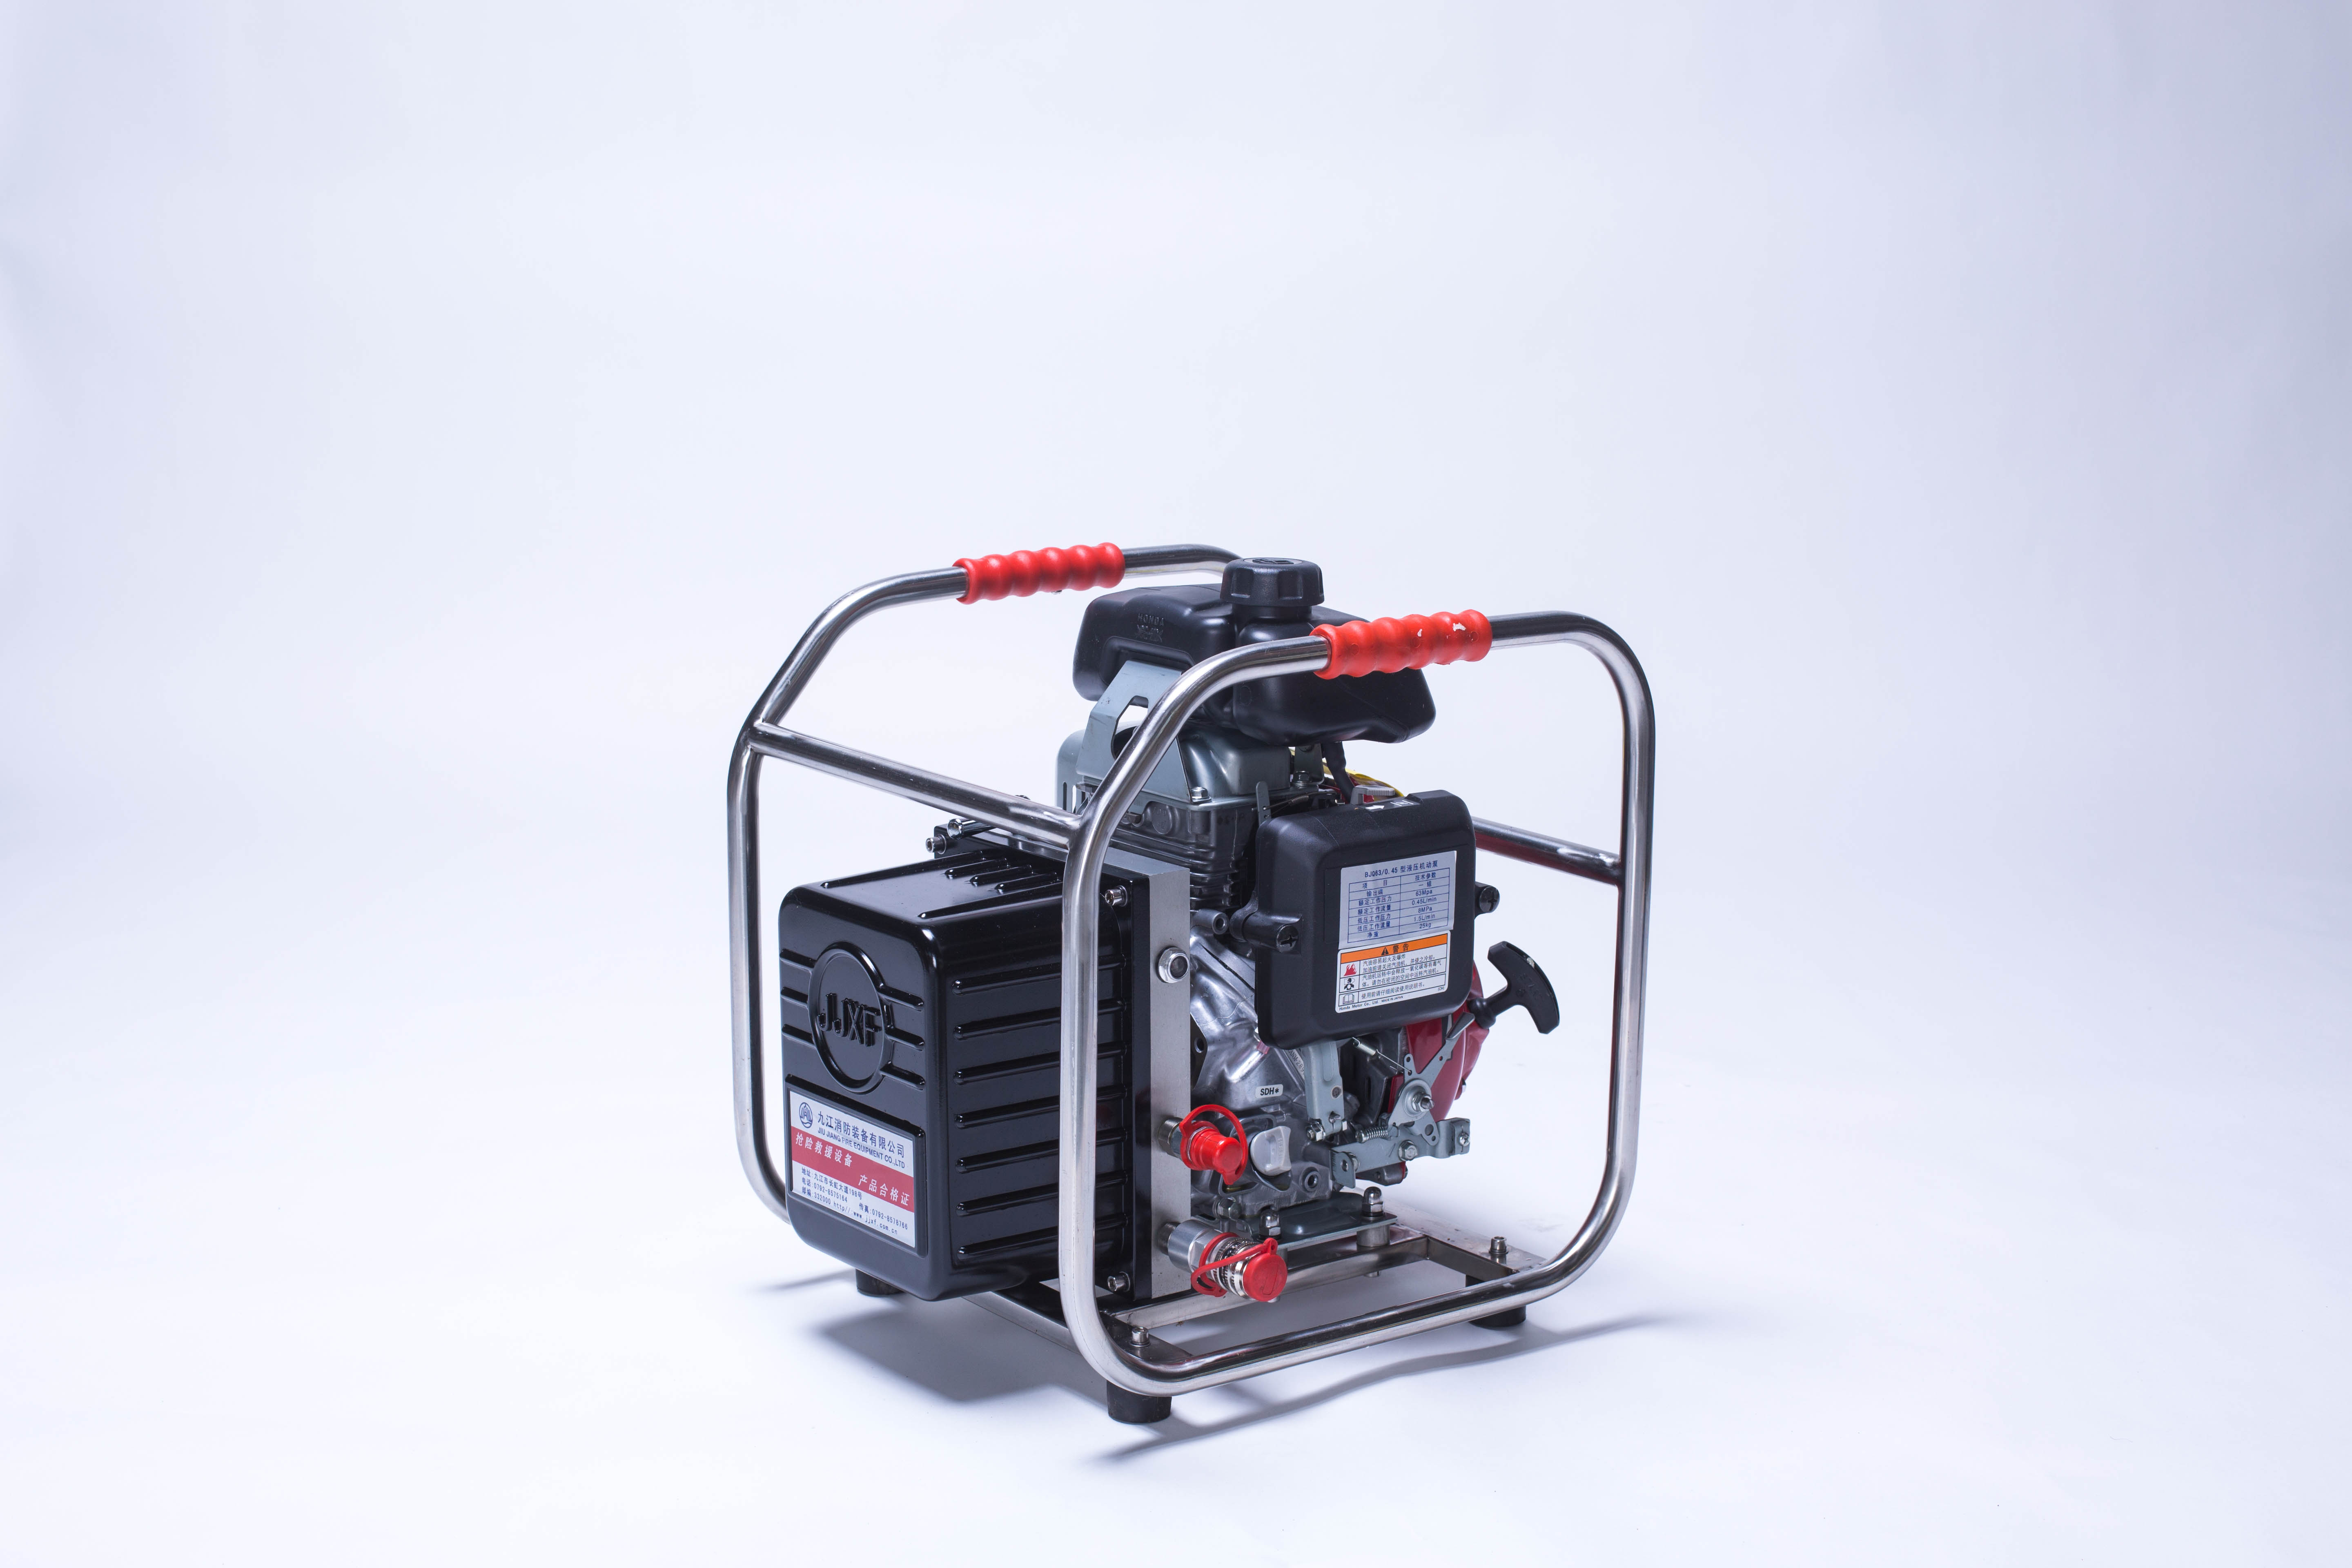  firefighting Portable hydraulic pumps for rescue